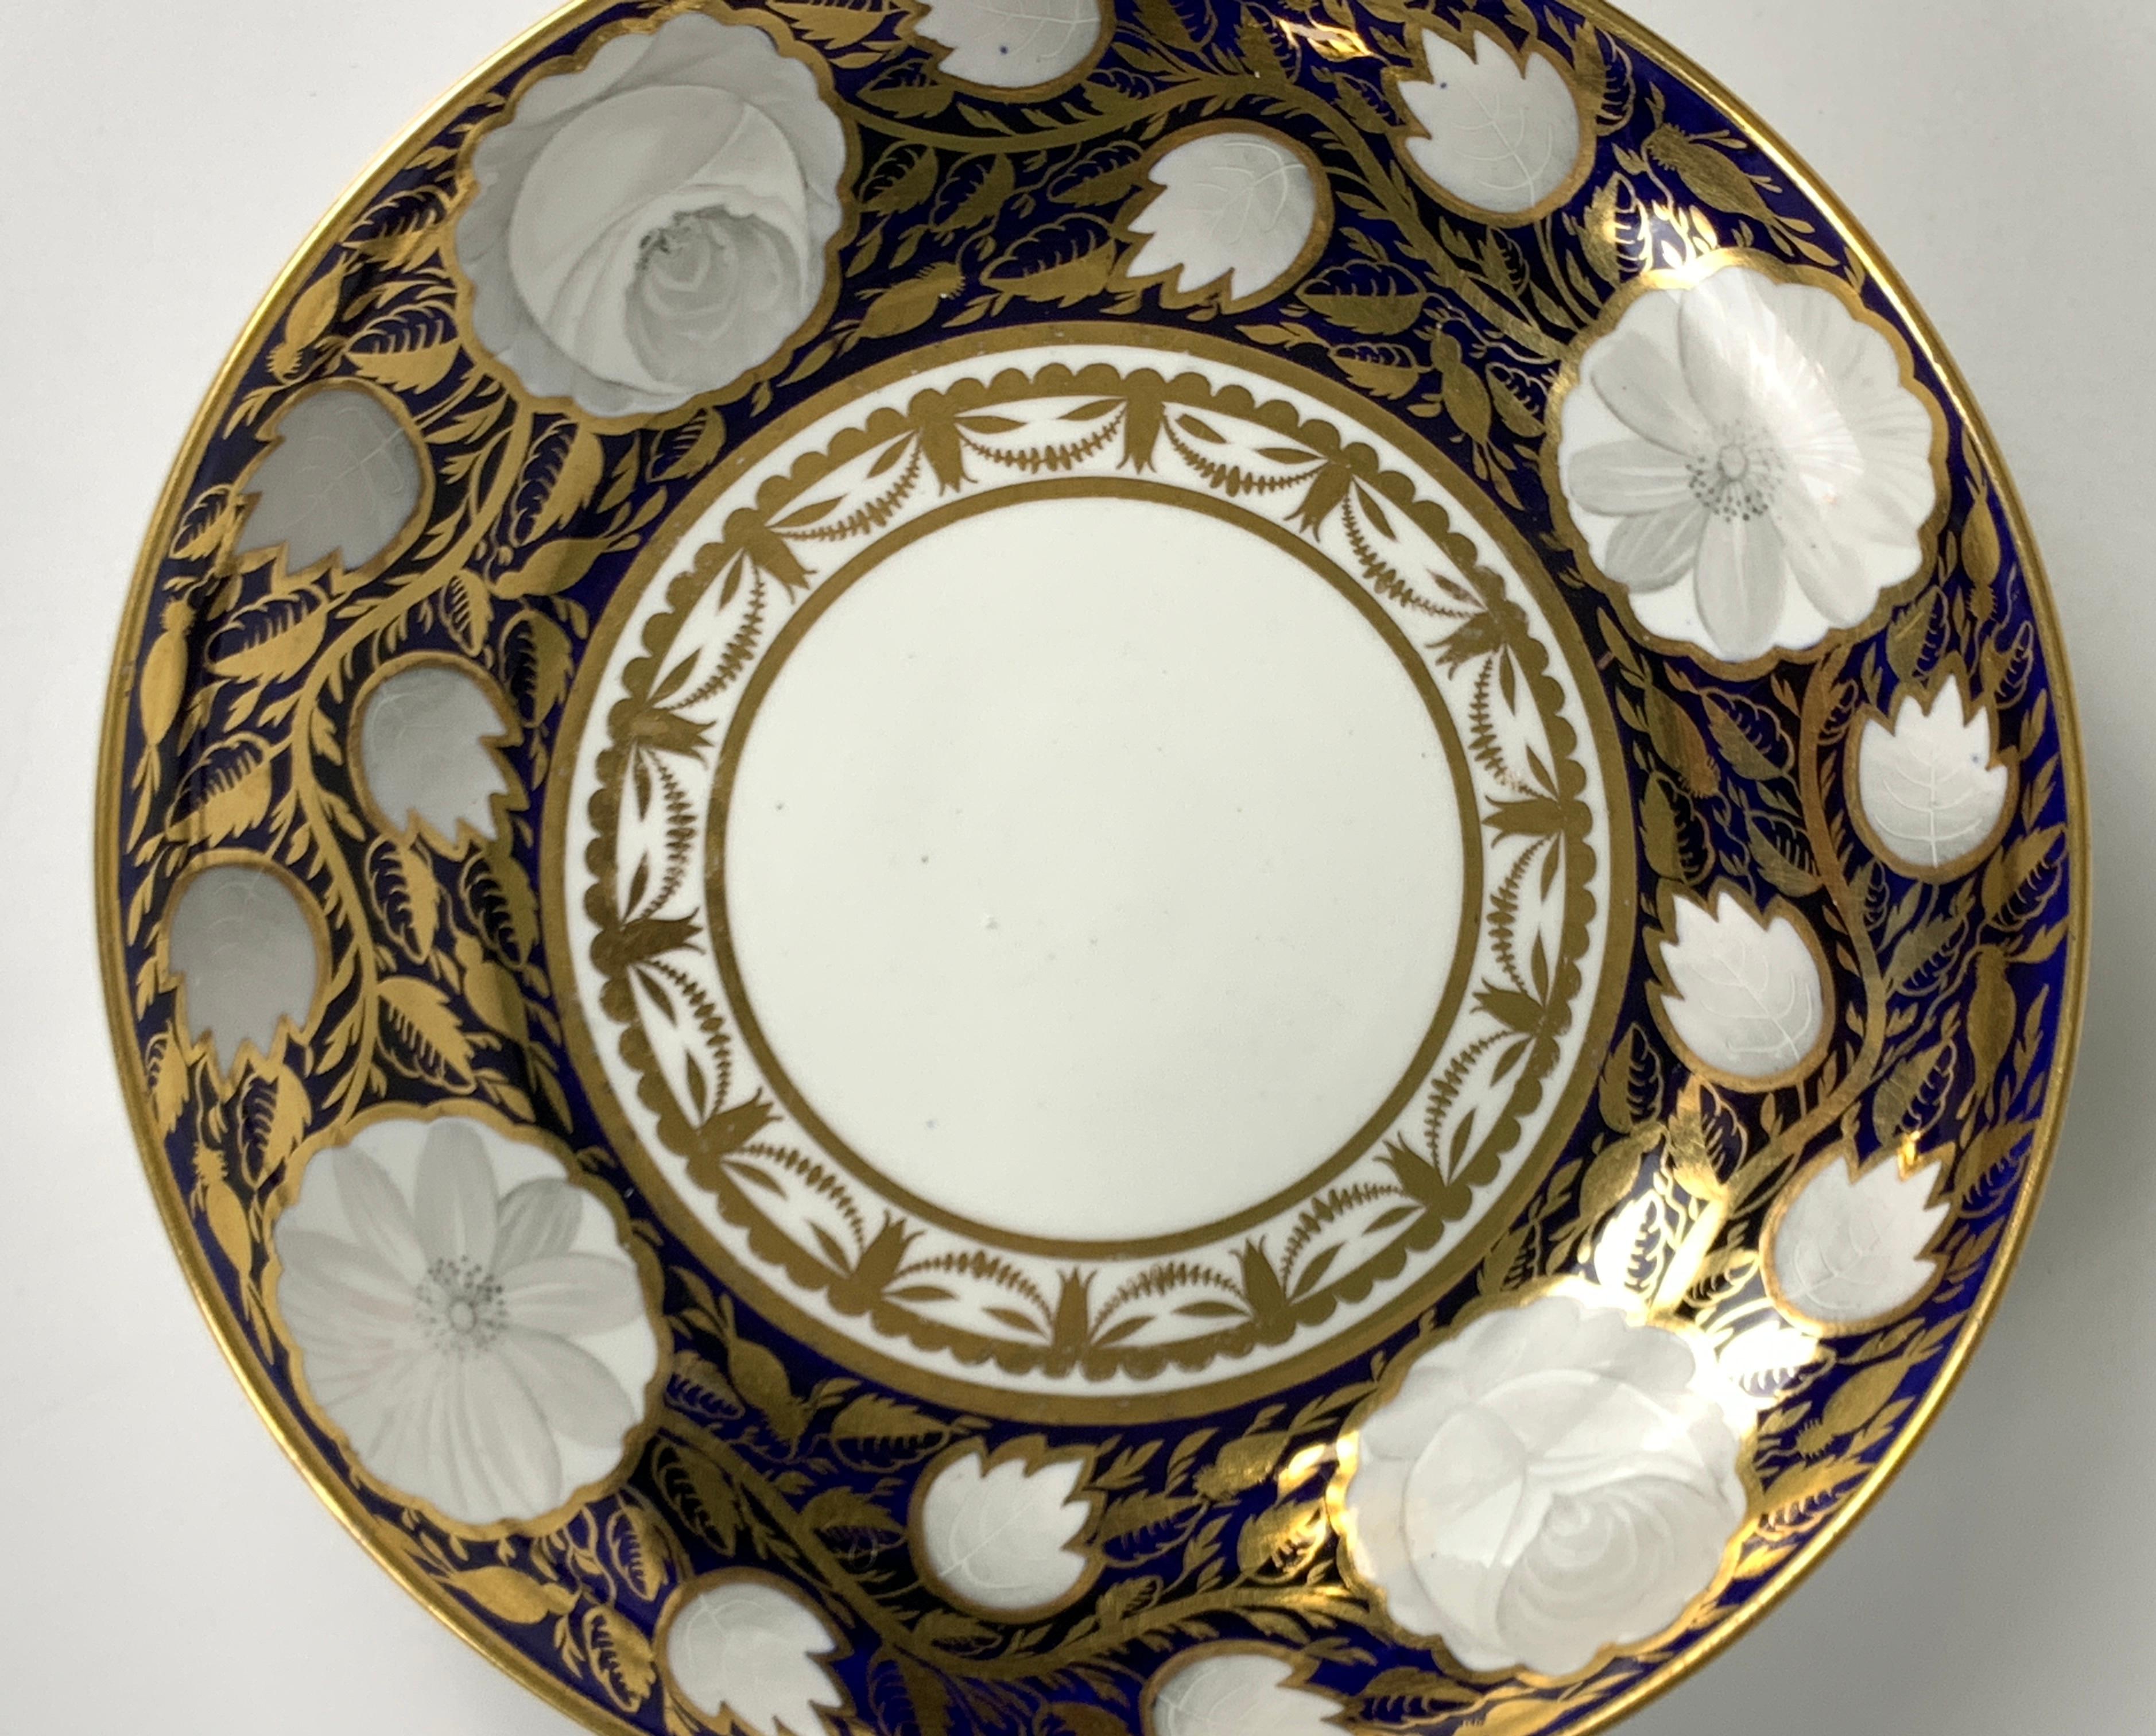 Regency Blue and White and Gold Dish Made in England by Spode, Circa 1820